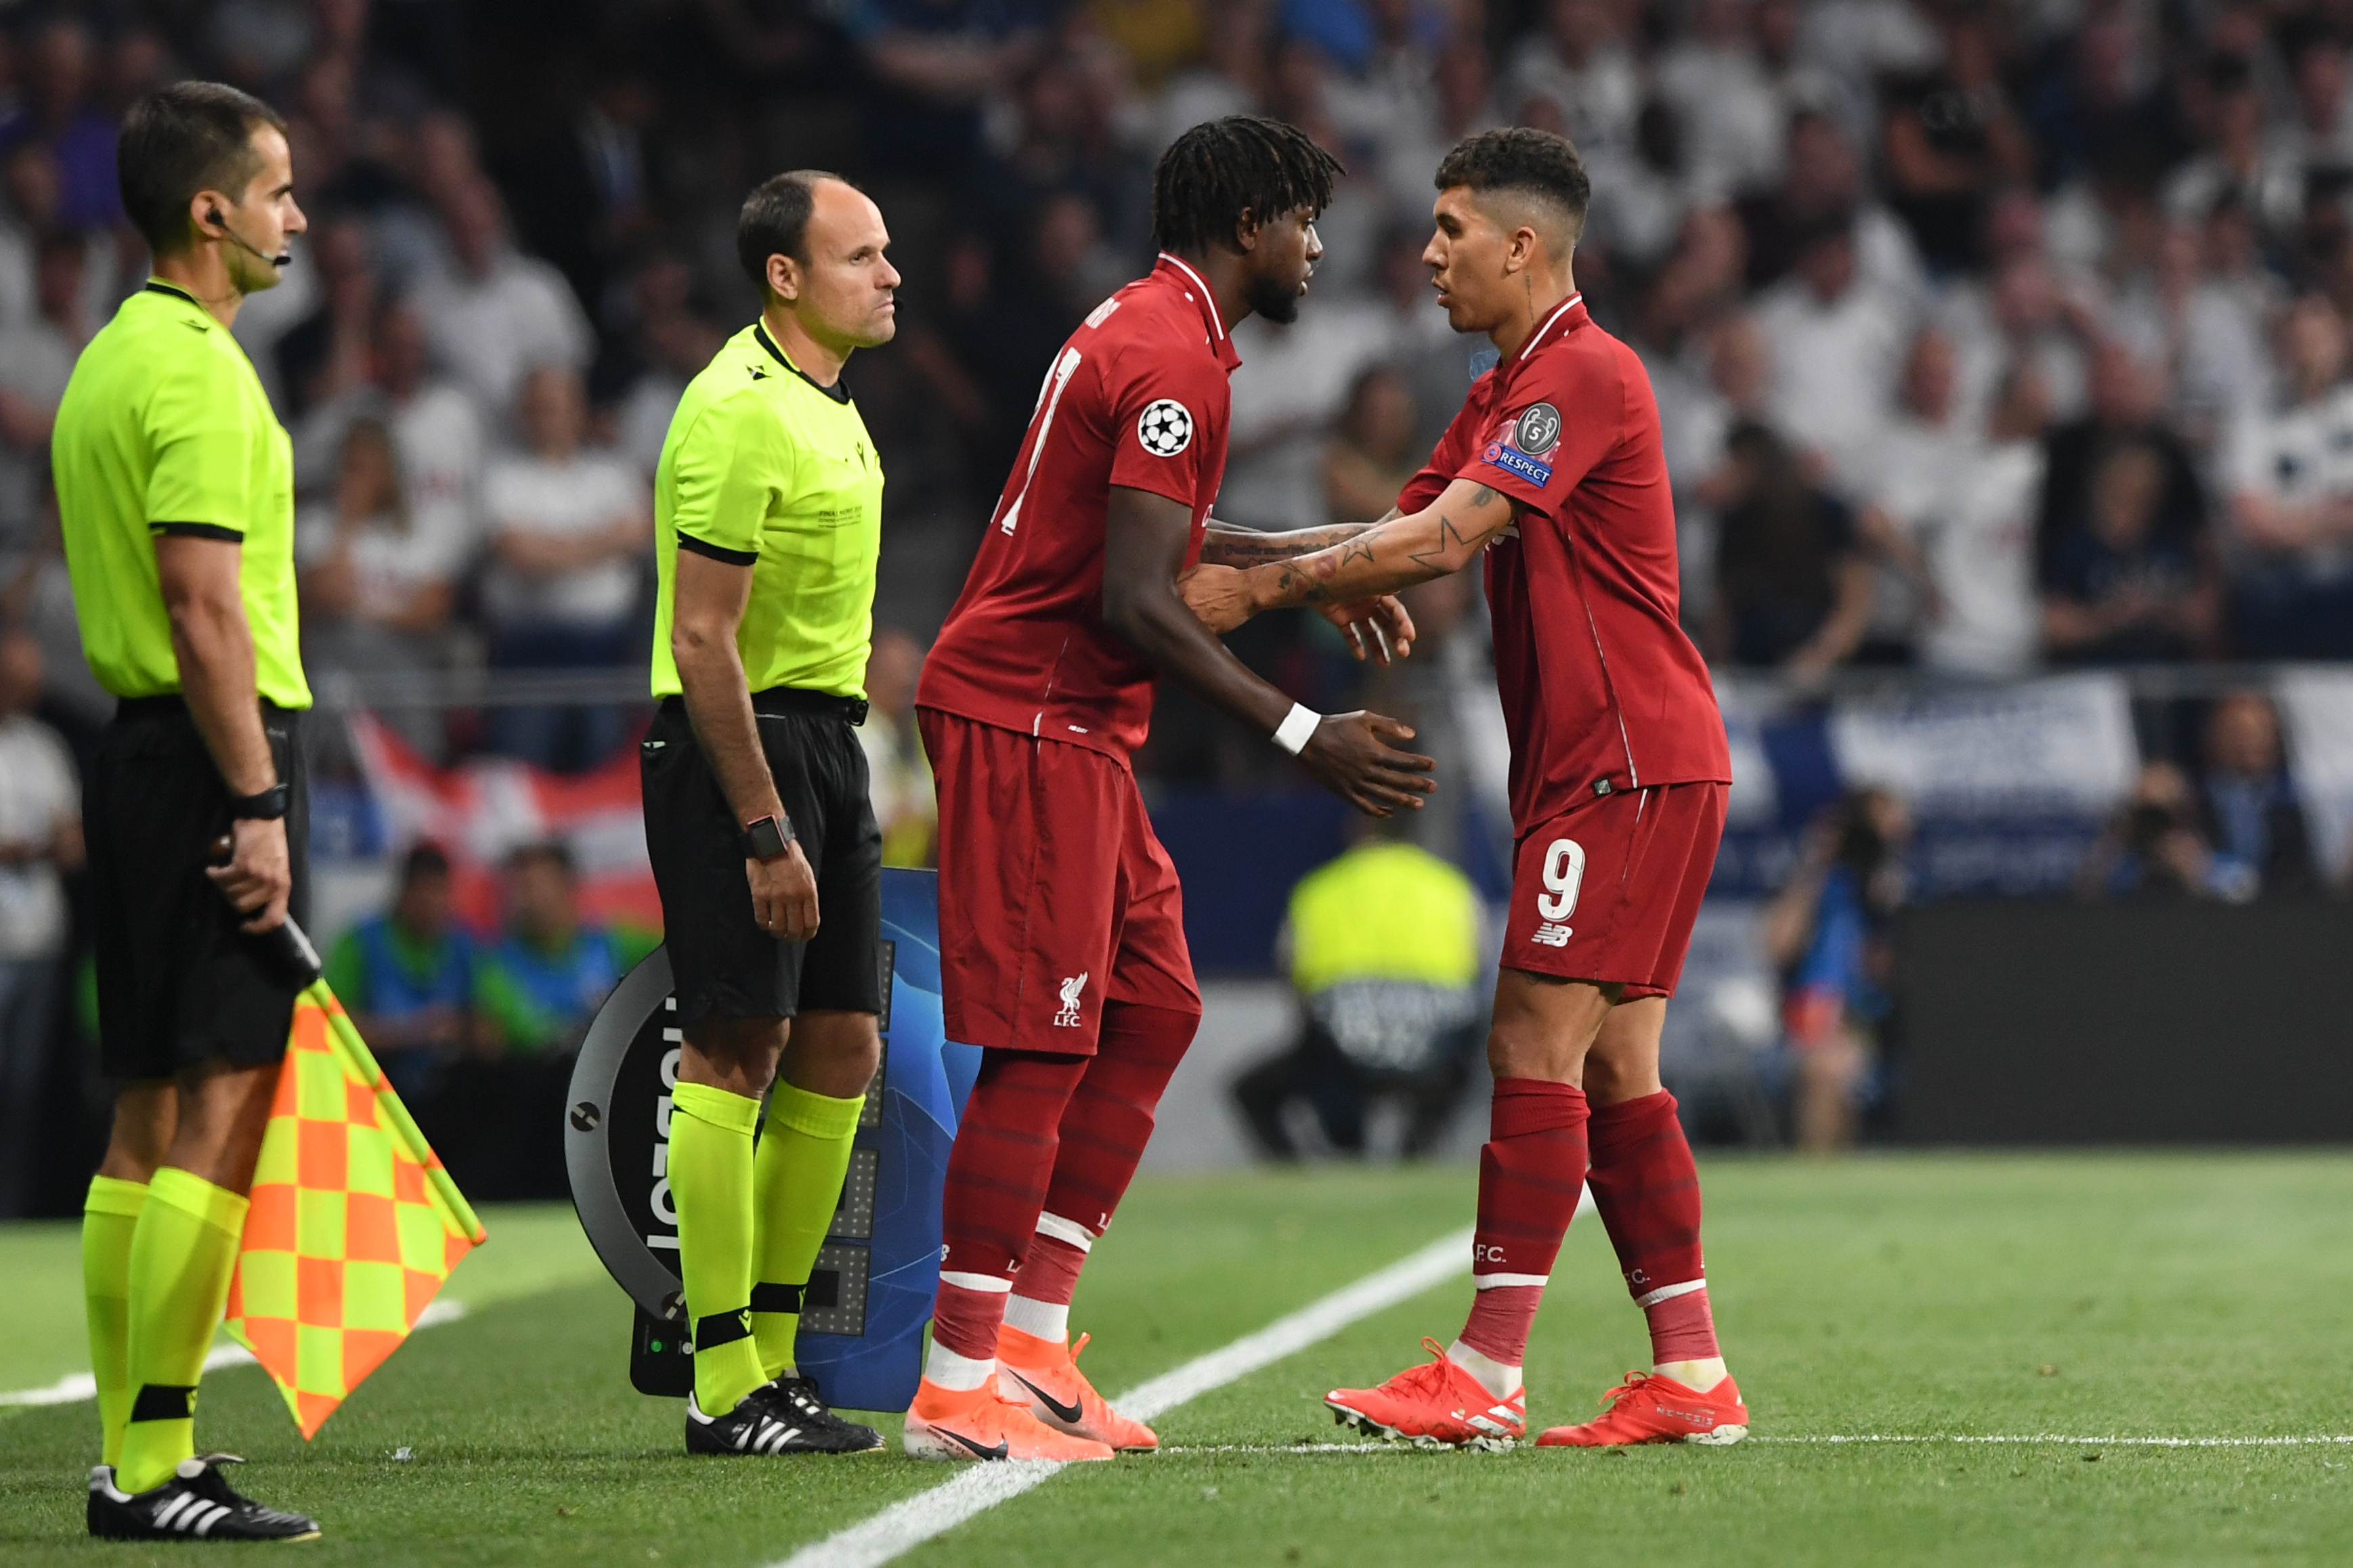 MADRID, SPAIN - JUNE 01: Roberto Firmino of Liverpool is replaced as a substitute by teammate Divock Origi during the UEFA Champions League Final between Tottenham Hotspur and Liverpool at Estadio Wanda Metropolitano on June 01, 2019 in Madrid, Spain. (Photo by Michael Regan/Getty Images)